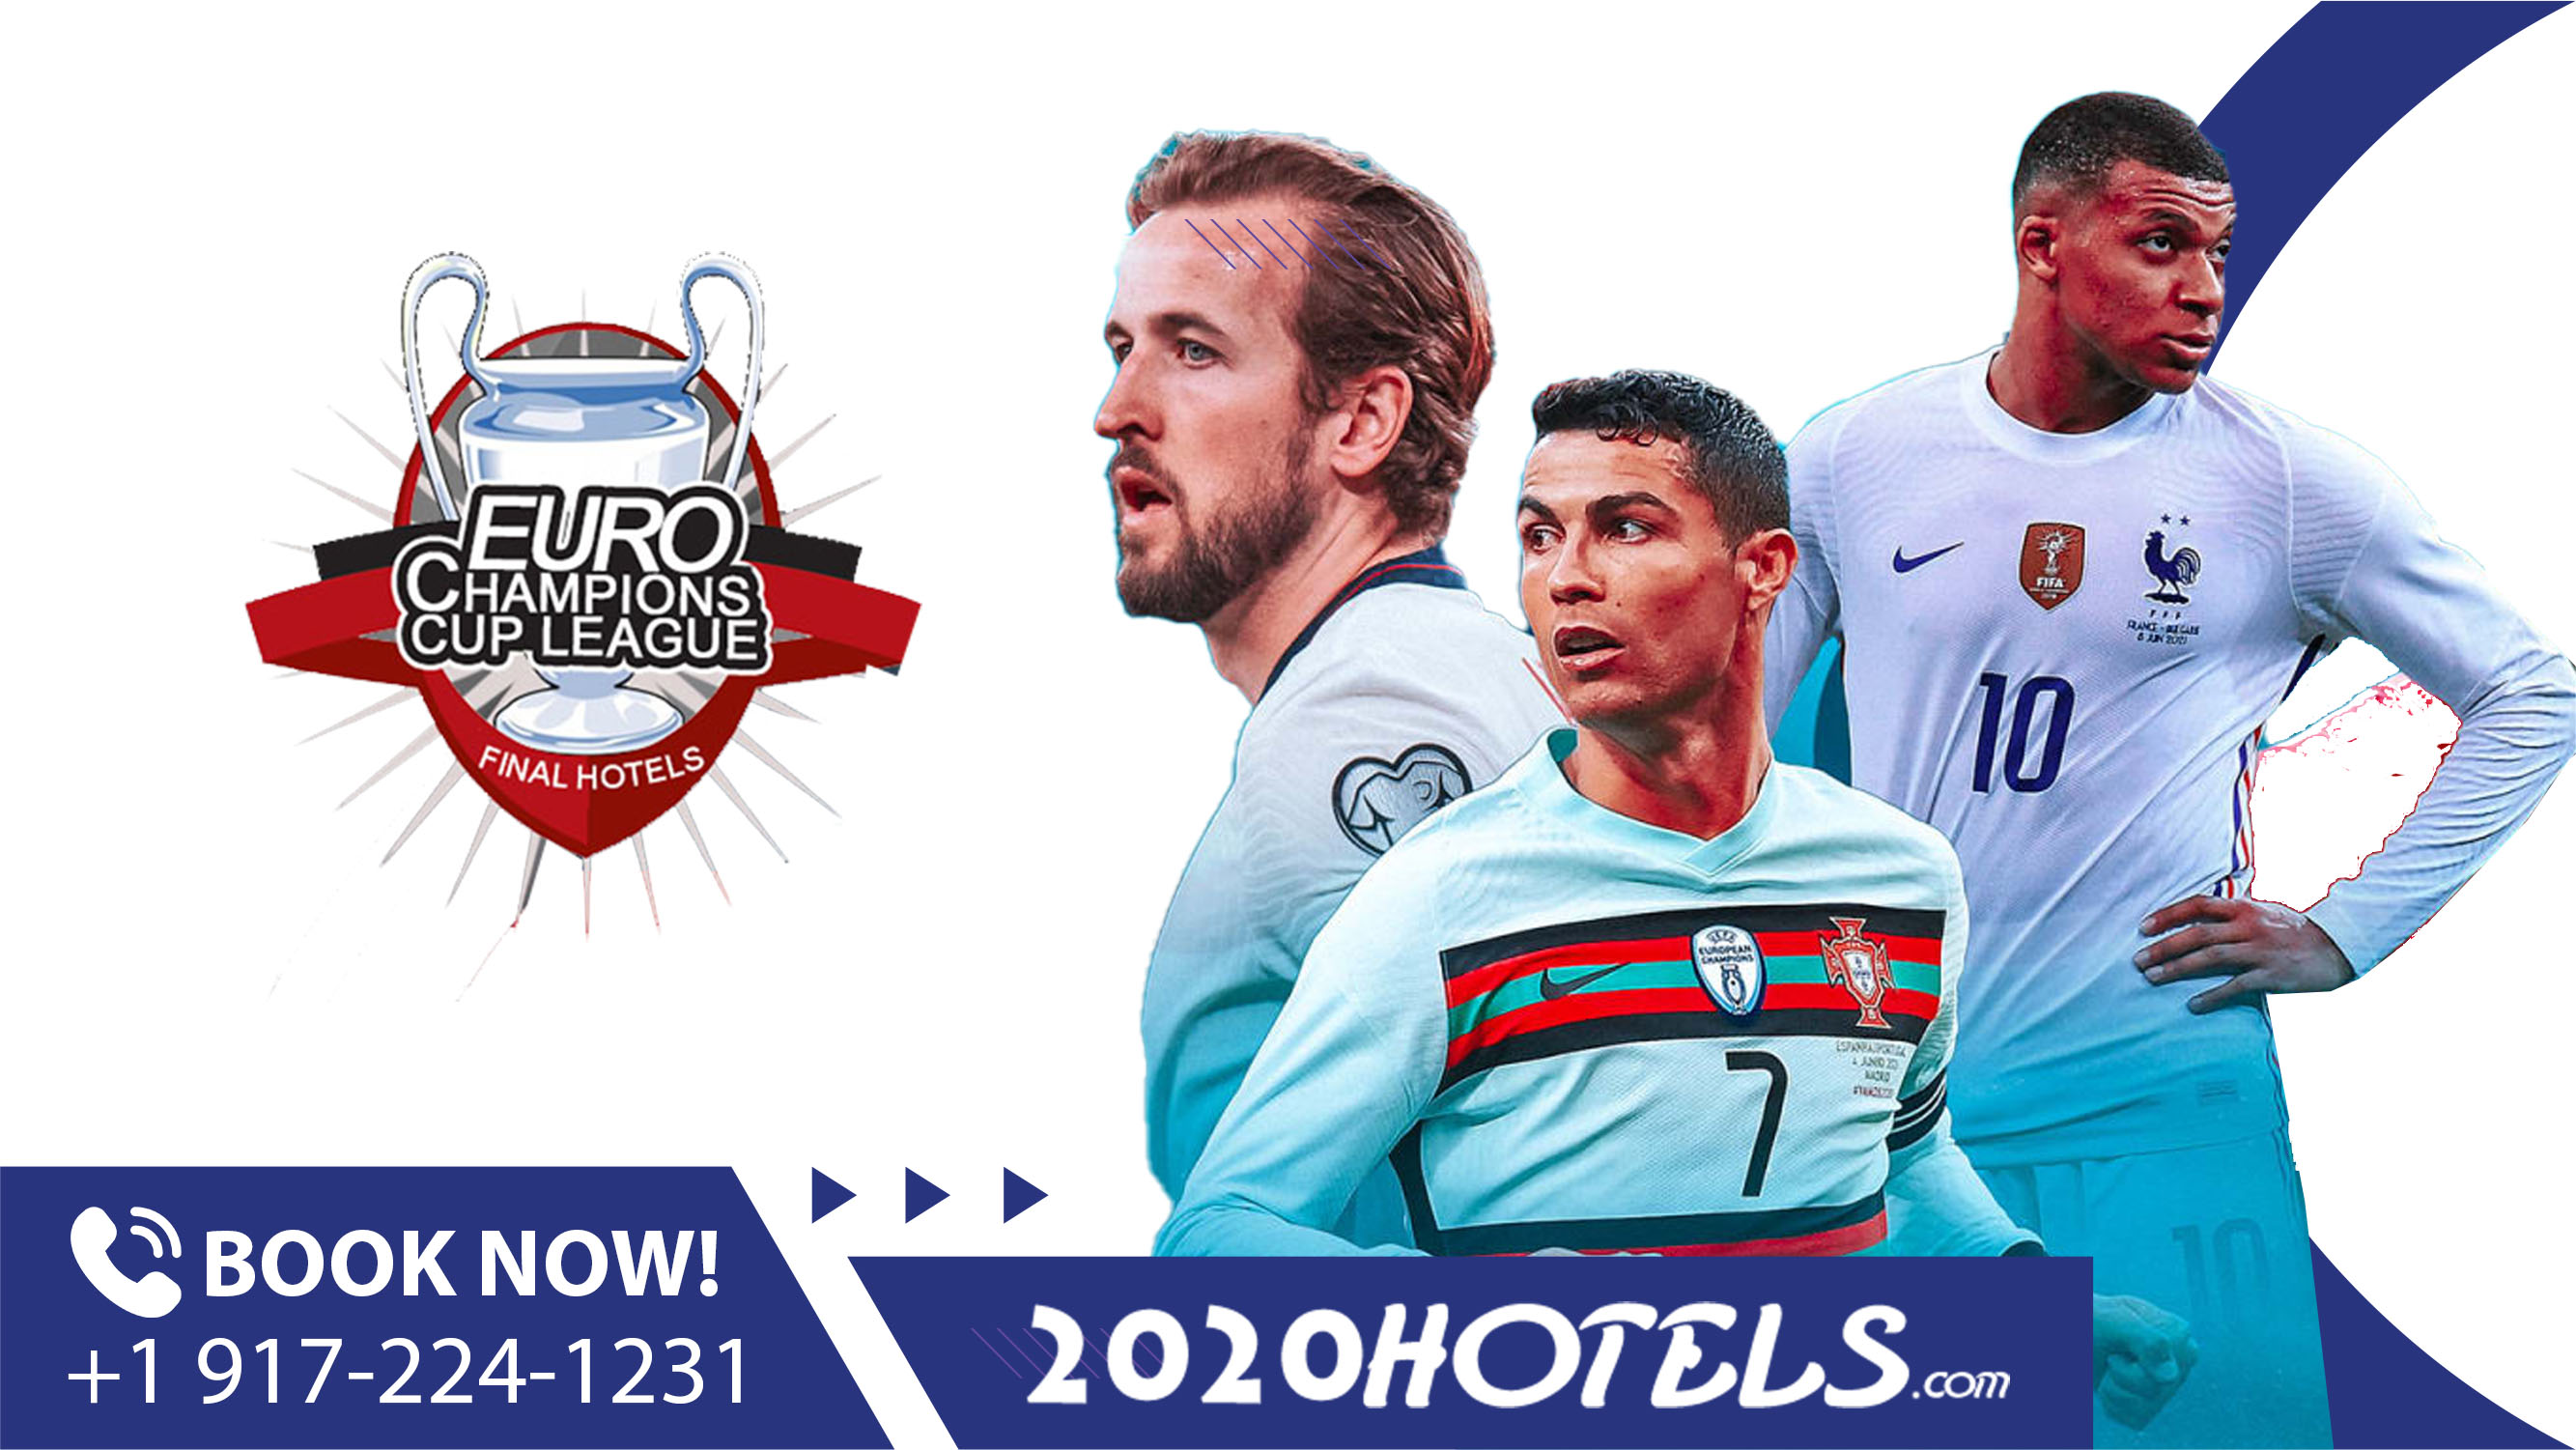 Book now UEFA Euro 2024 Hotels, last minute deals on hotels and packages only @ 2020hotels.com click here to book!